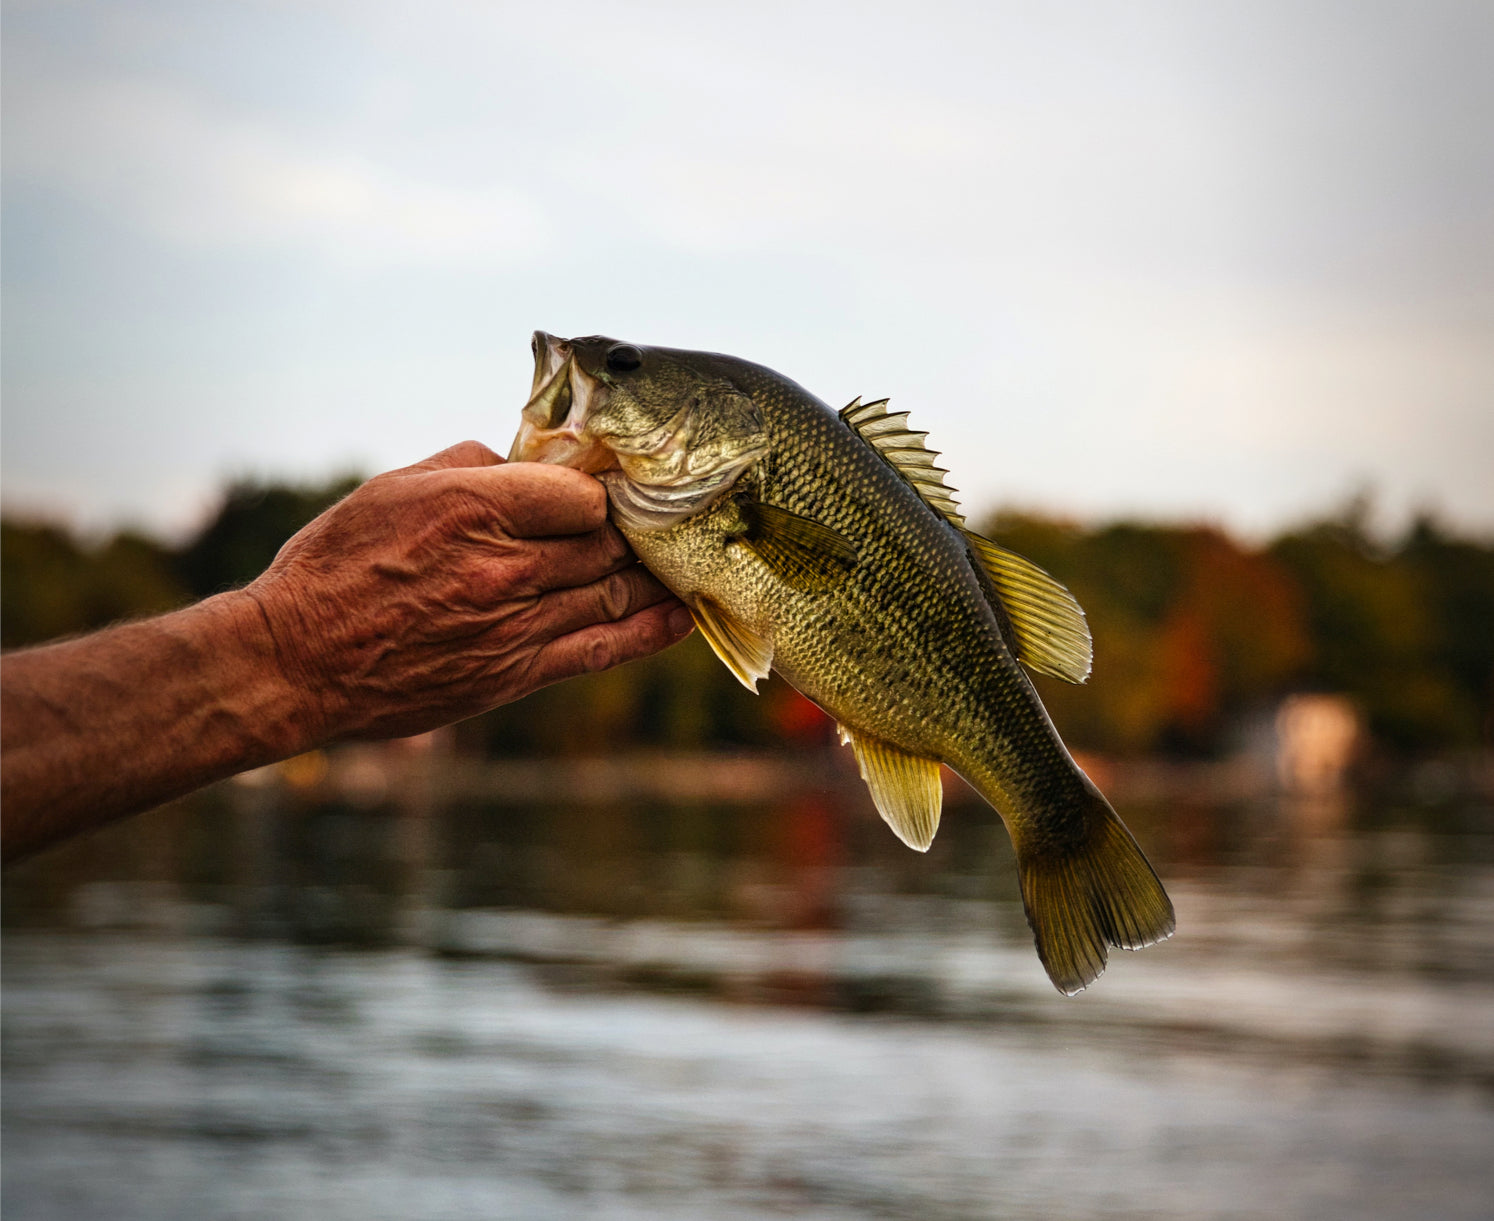 How to Find the Right Depth to Bass Fish